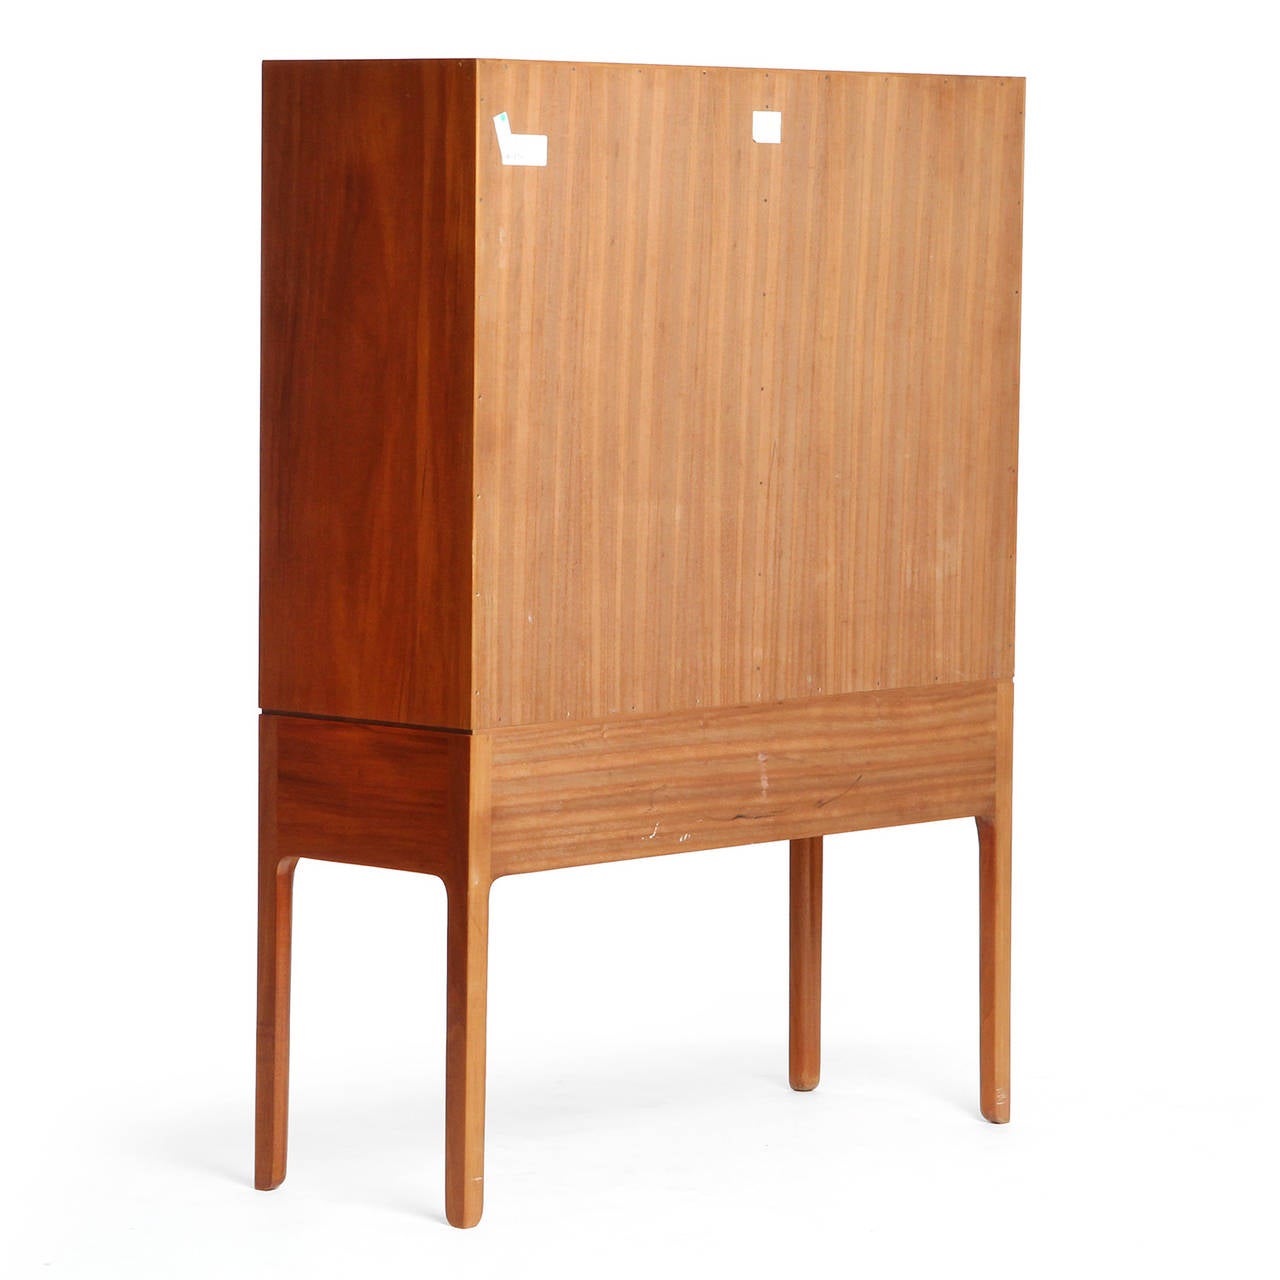 1940s Danish Mahogany Cabinet by Ole Wanscher for A.J. Iversen 1